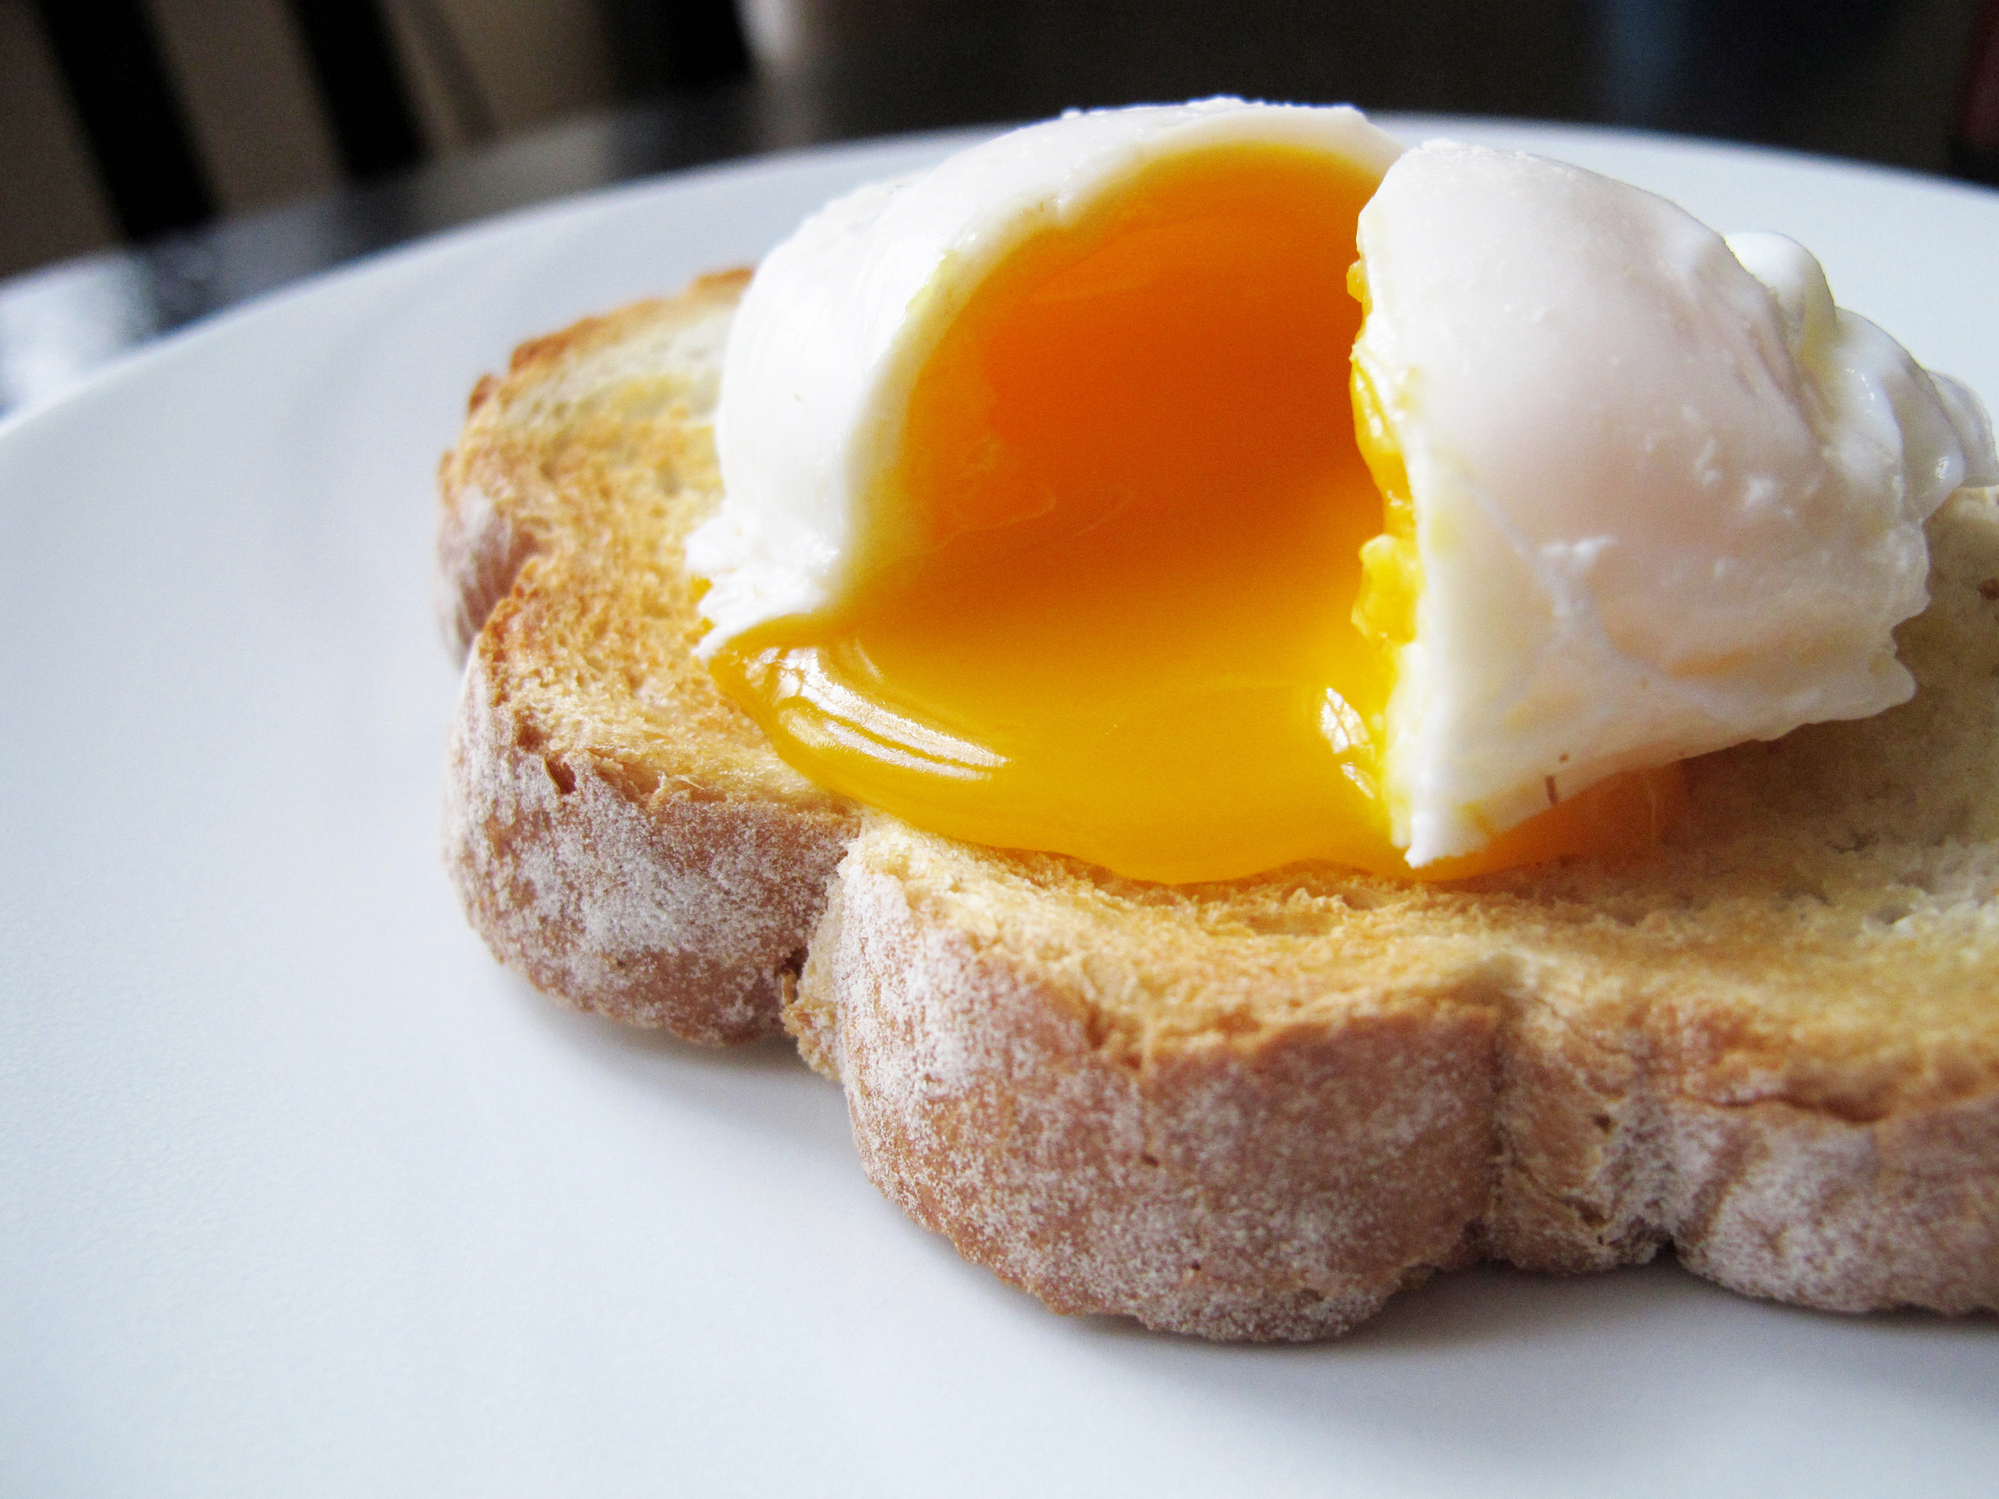 Poached egg with a runny yolk sitting atop a slice of toasted bread